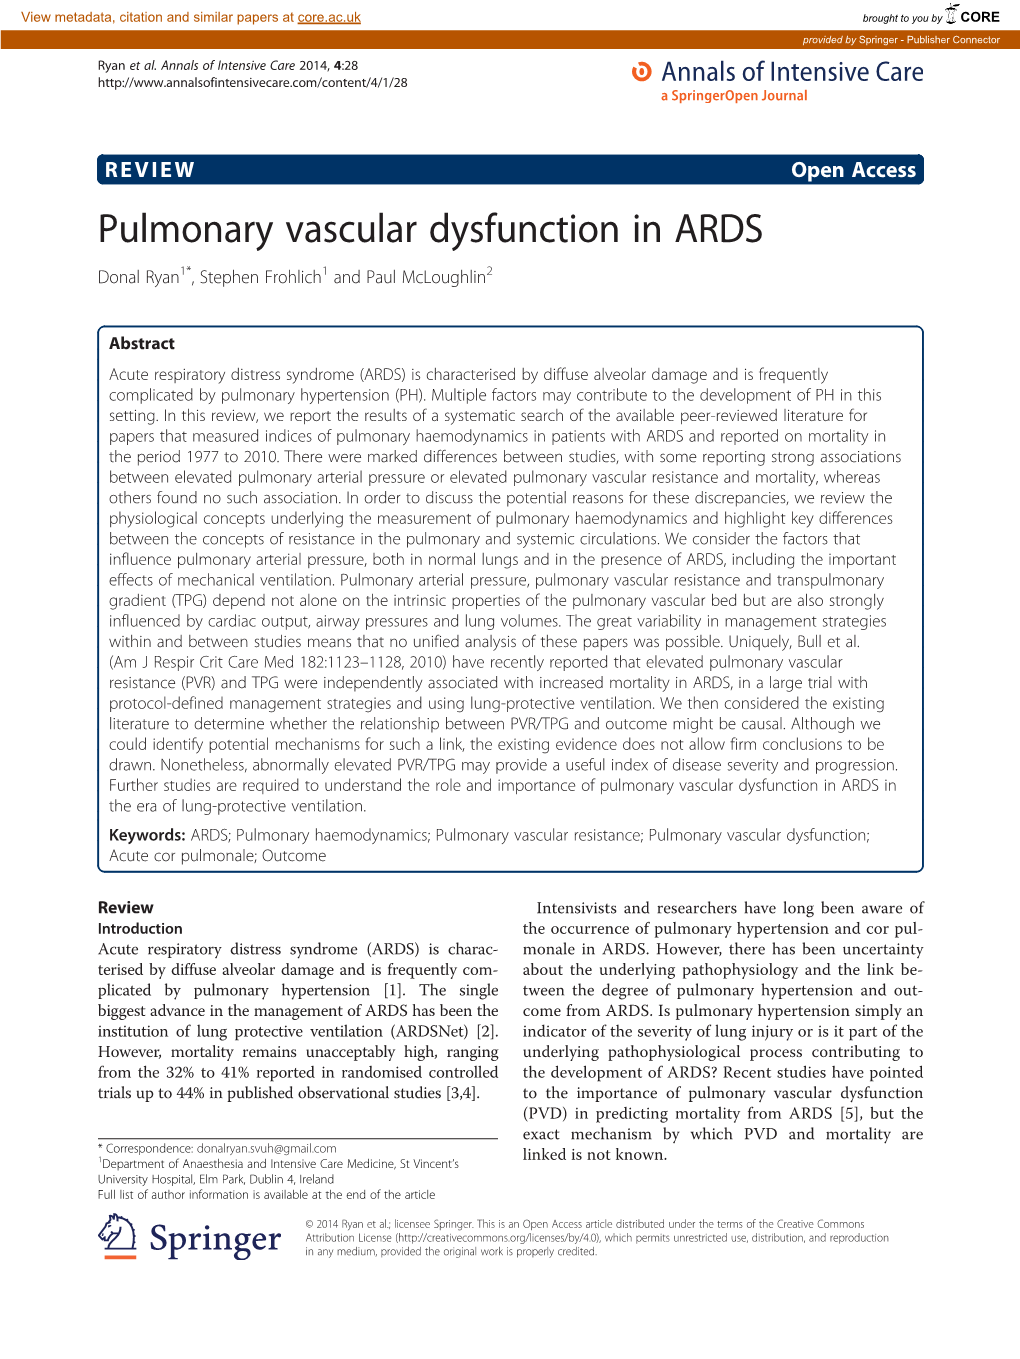 Pulmonary Vascular Dysfunction in ARDS Donal Ryan1*, Stephen Frohlich1 and Paul Mcloughlin2